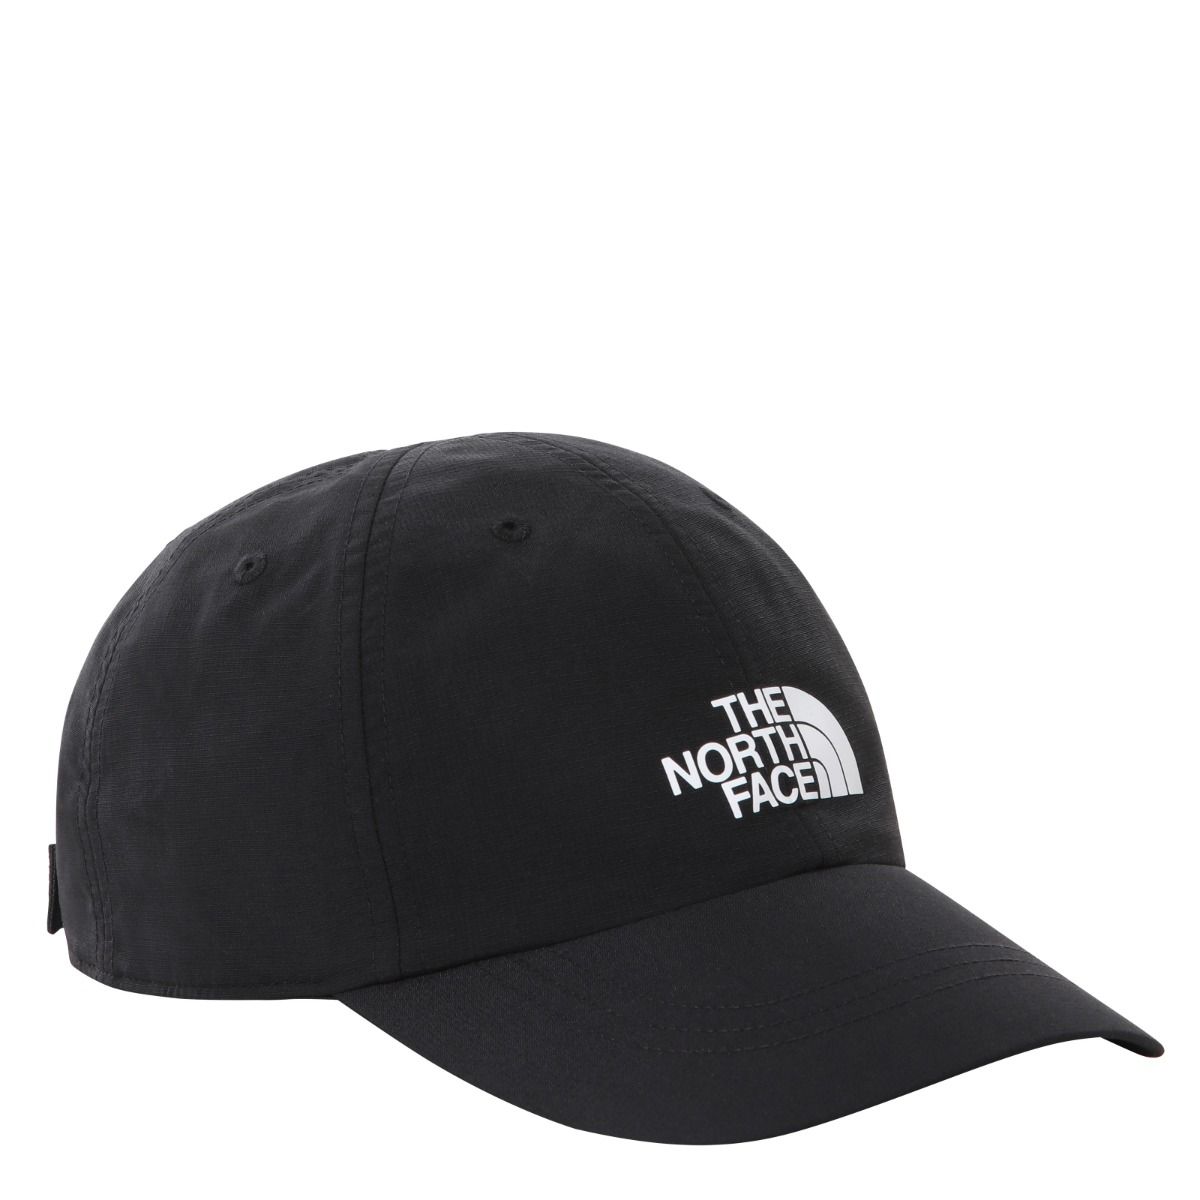 The North Face - HORIZON HAT